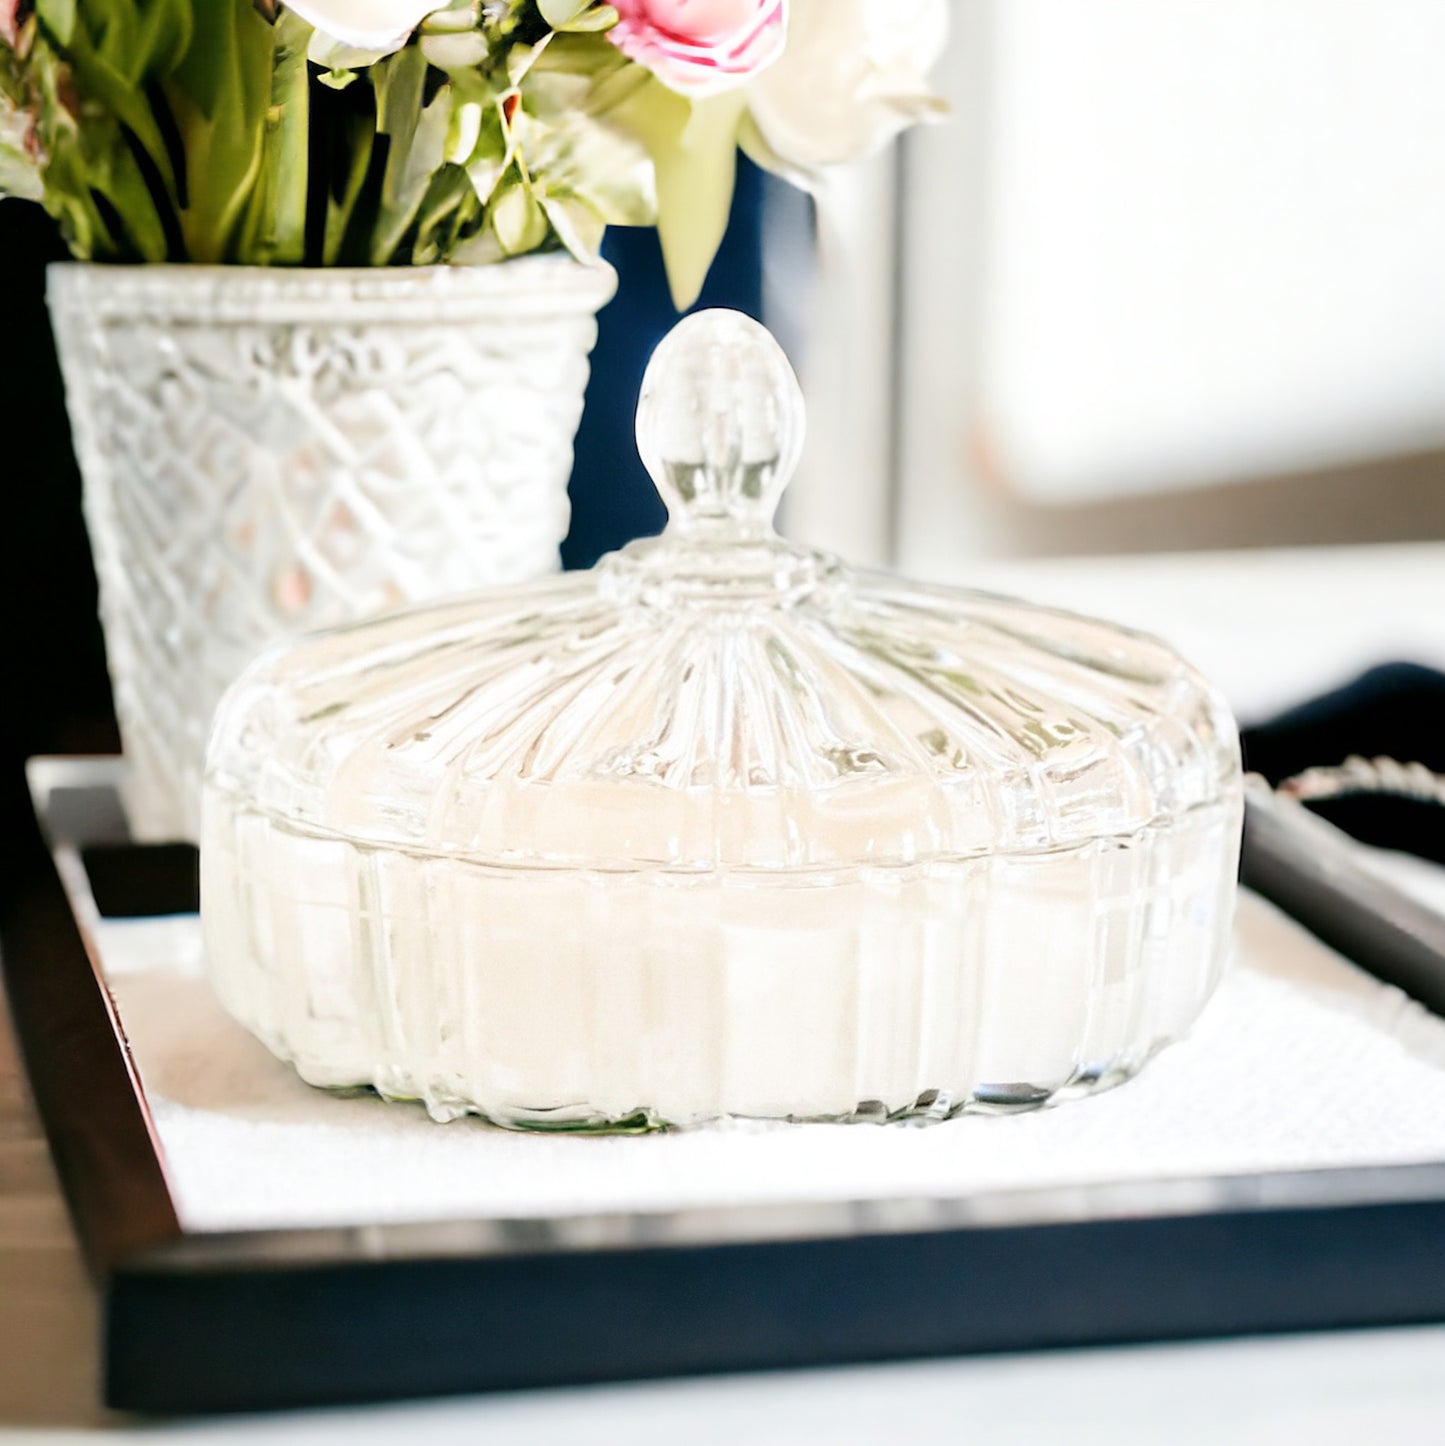 Sea Salt & Orchid Candle | Vintage Anchor Hocking Candy Dish